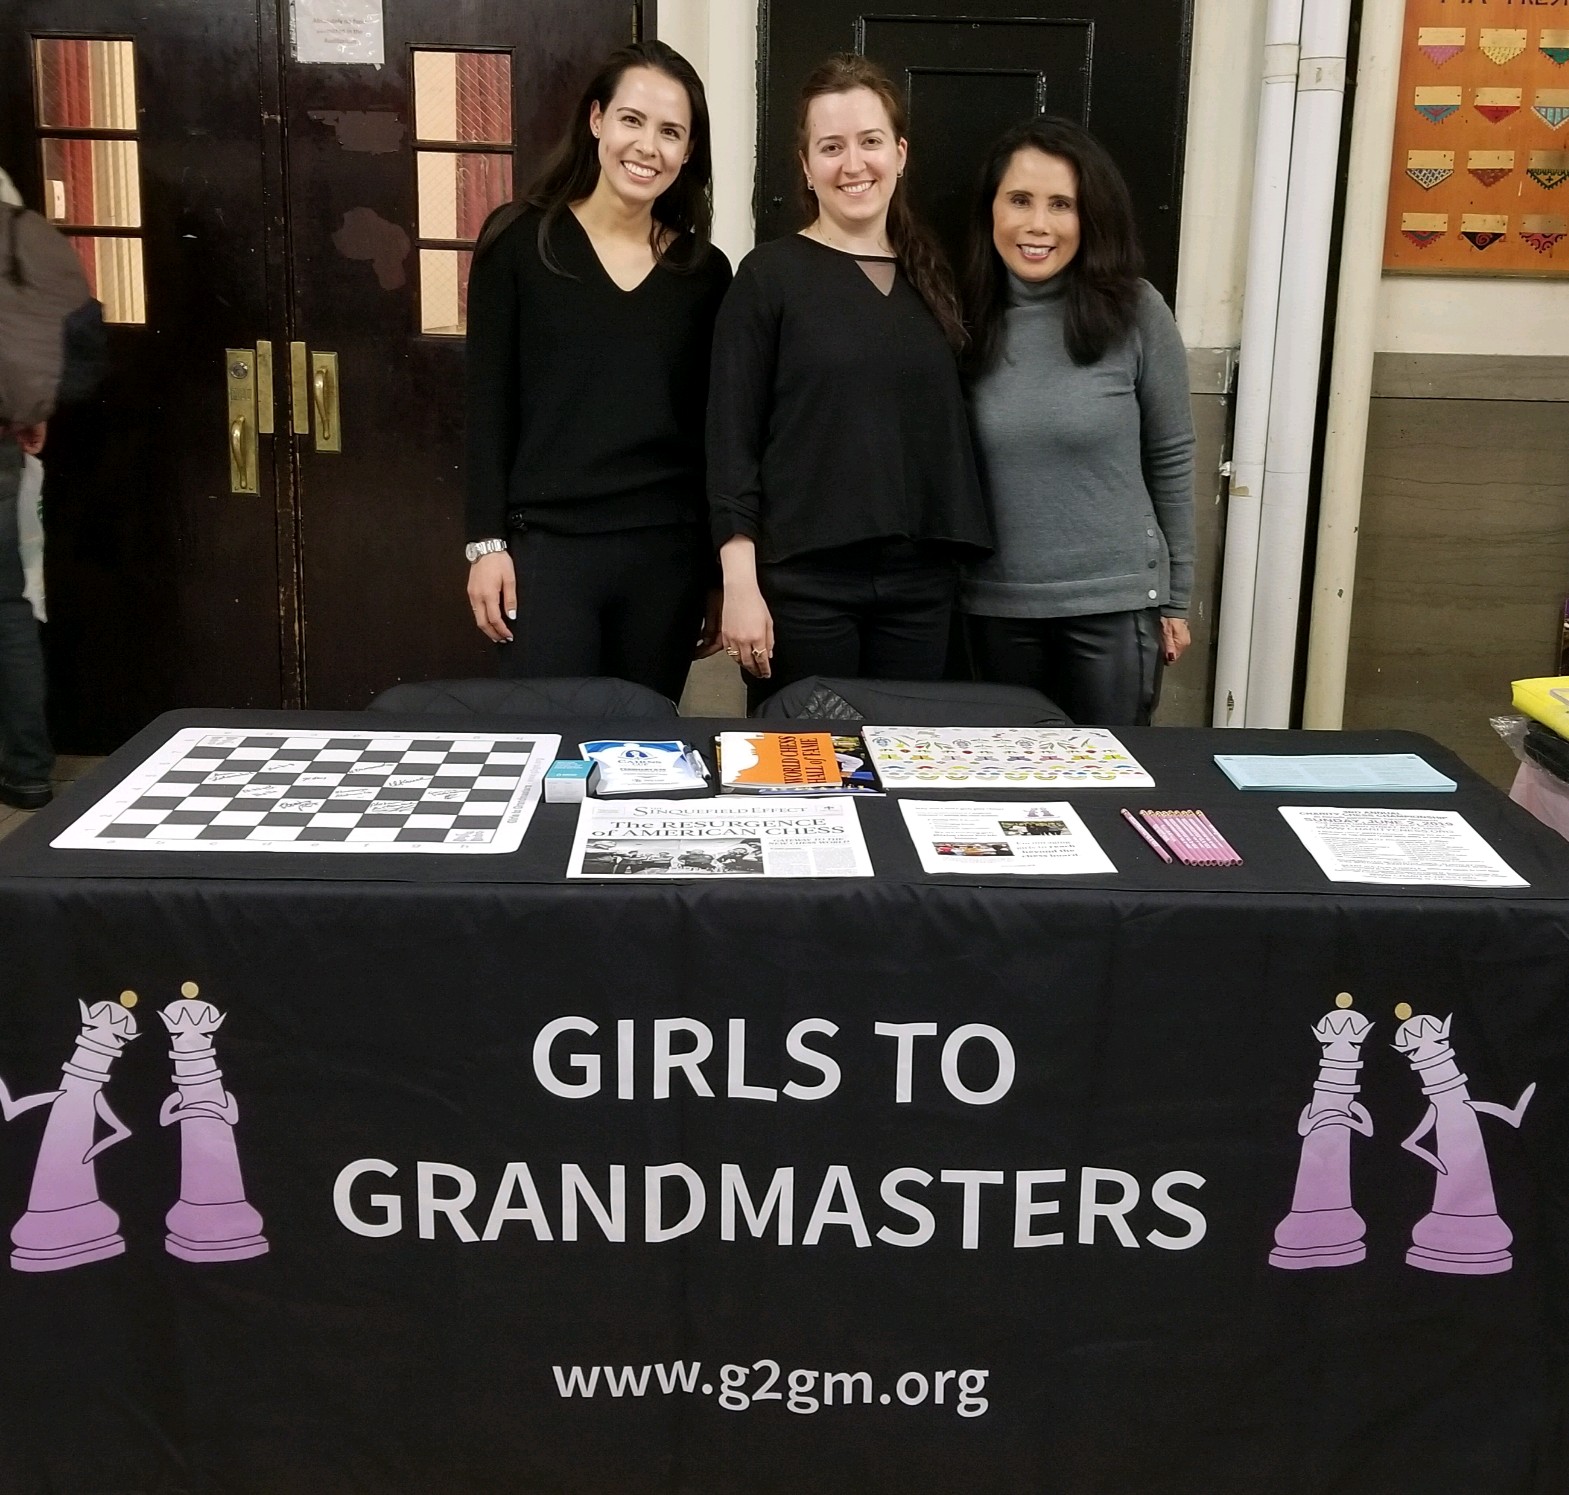  Karsten, Grandmaster Irina Krush, and VP Kimberly at the All Girls NYC Chess Championship, hosted by Chess in the Schools. 